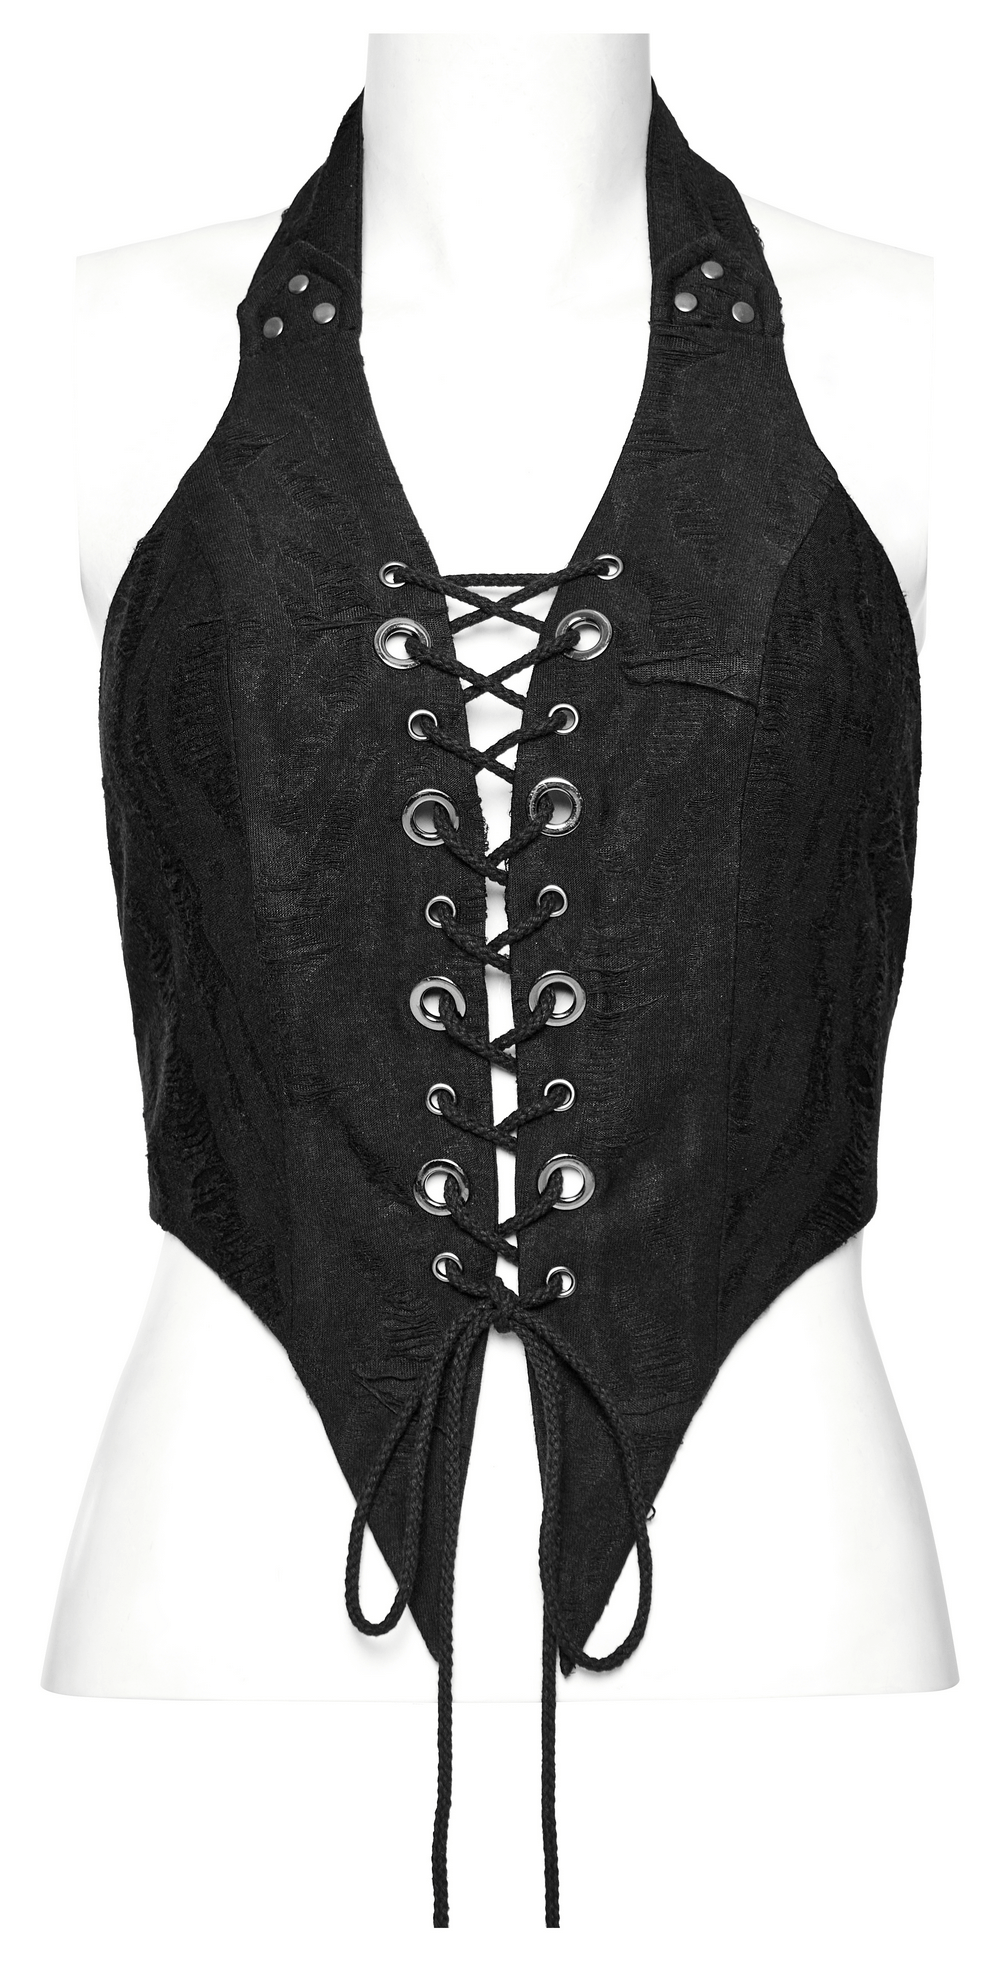 Edgy Black Punk Halter Crop Top with Lace Up Front